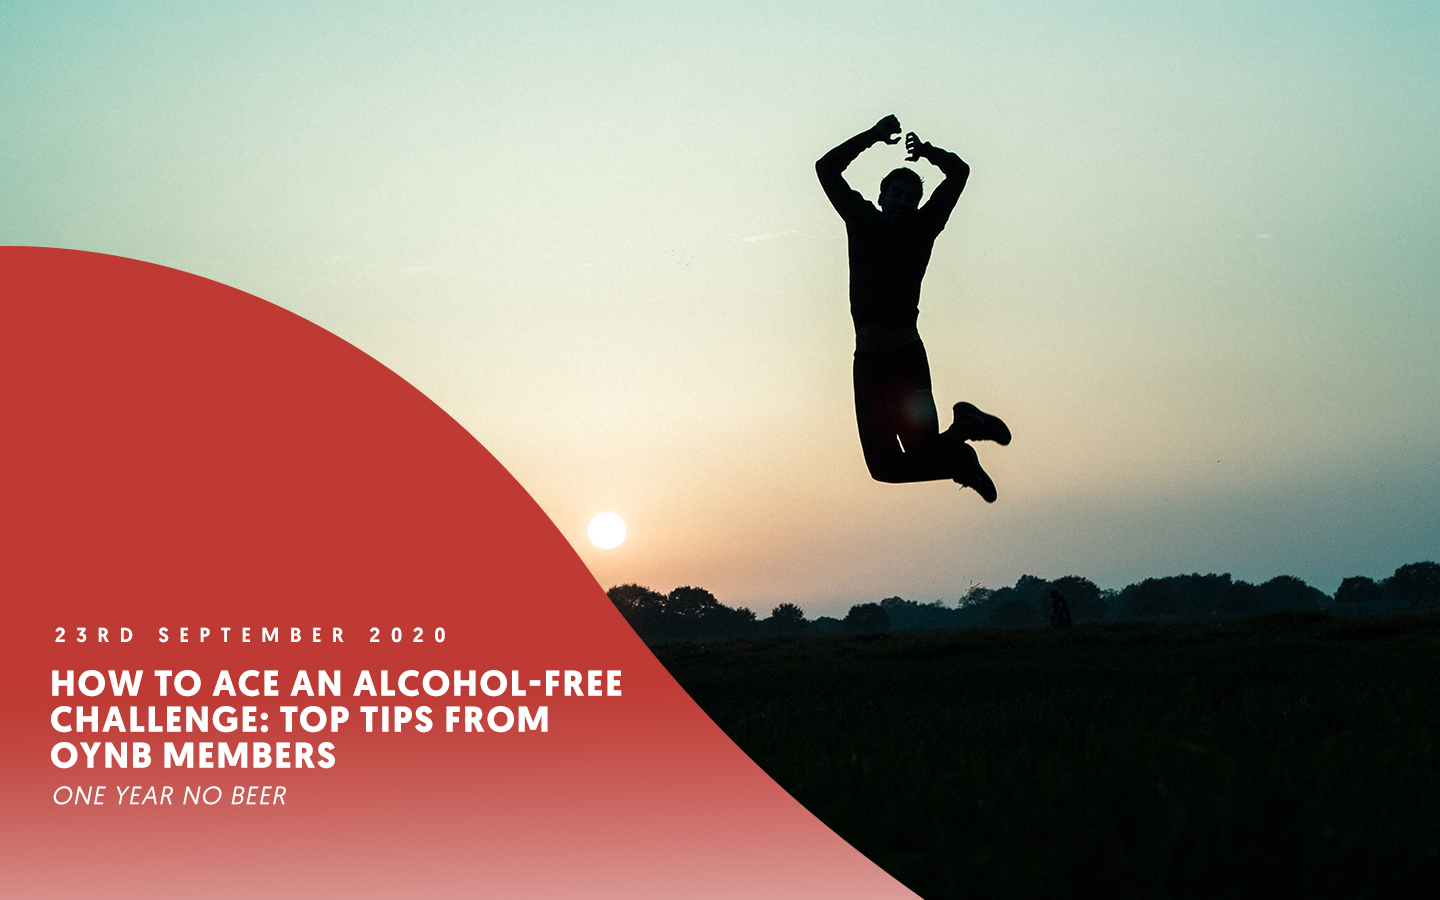 How to ace an alcohol-free challenge: Top tips from OYNB members